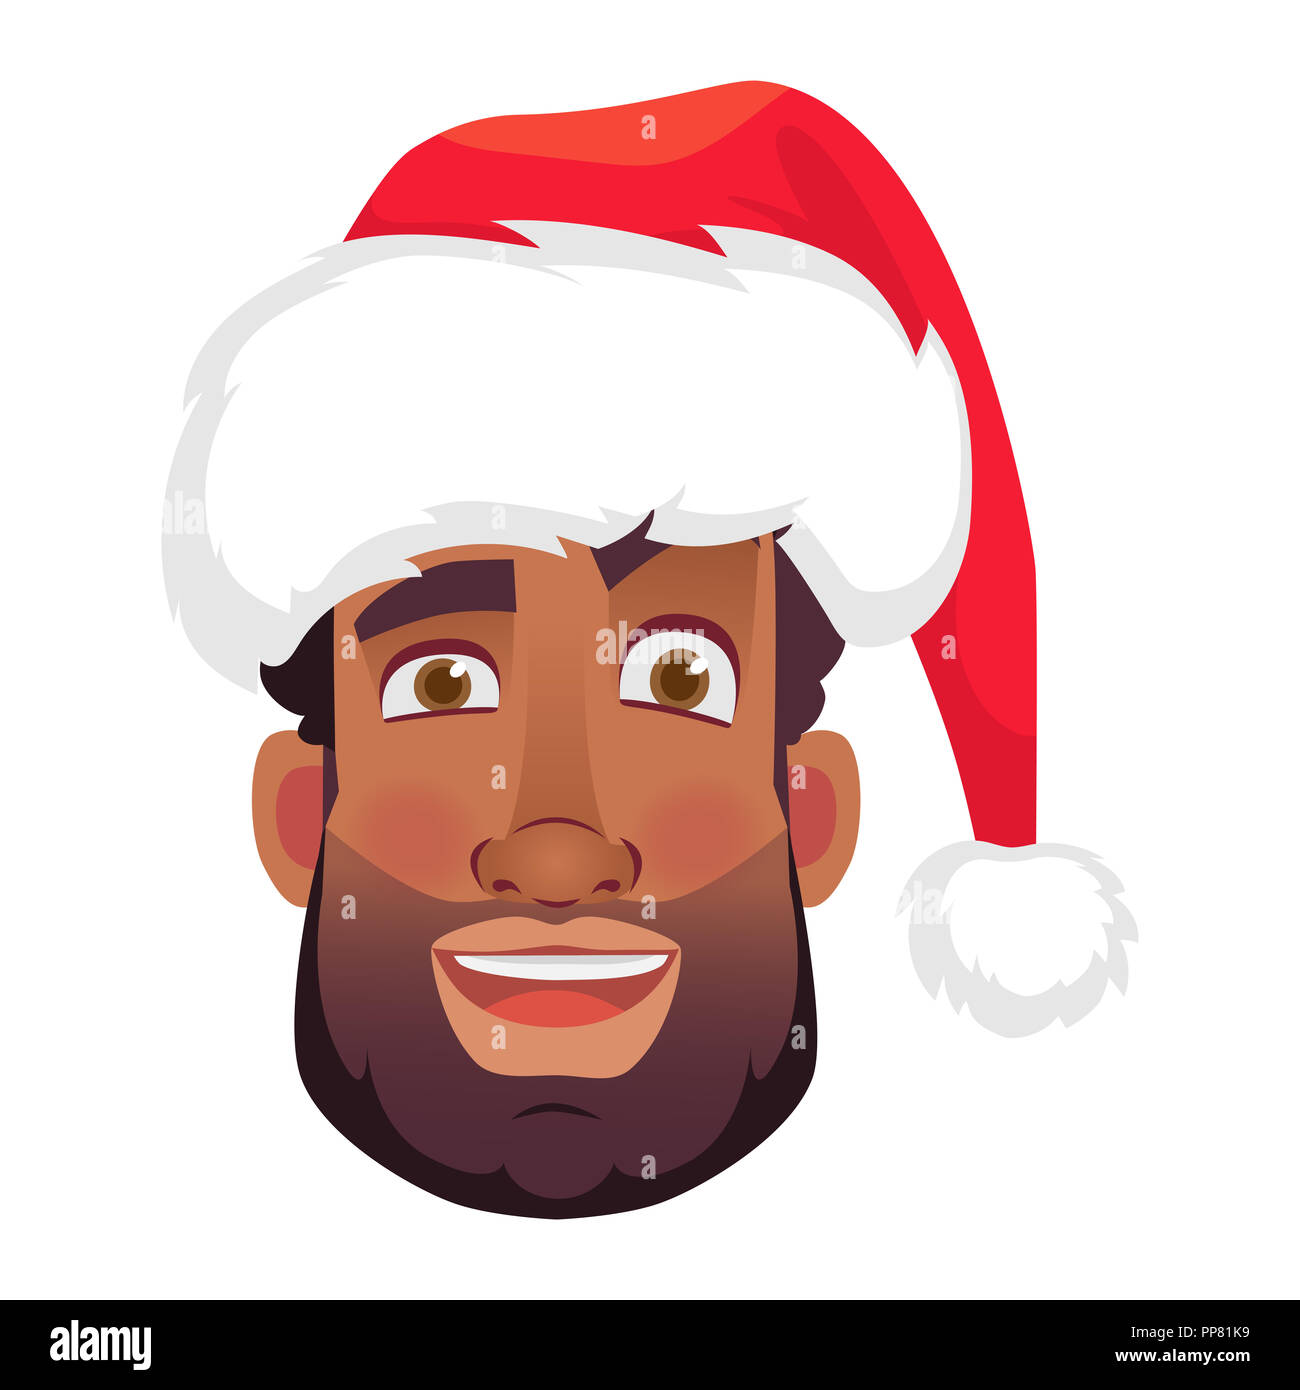 Head of African man in a Santa Claus hat. African american man face expression. Human emotions icon. Set of cartoon illustrations. Stock Photo